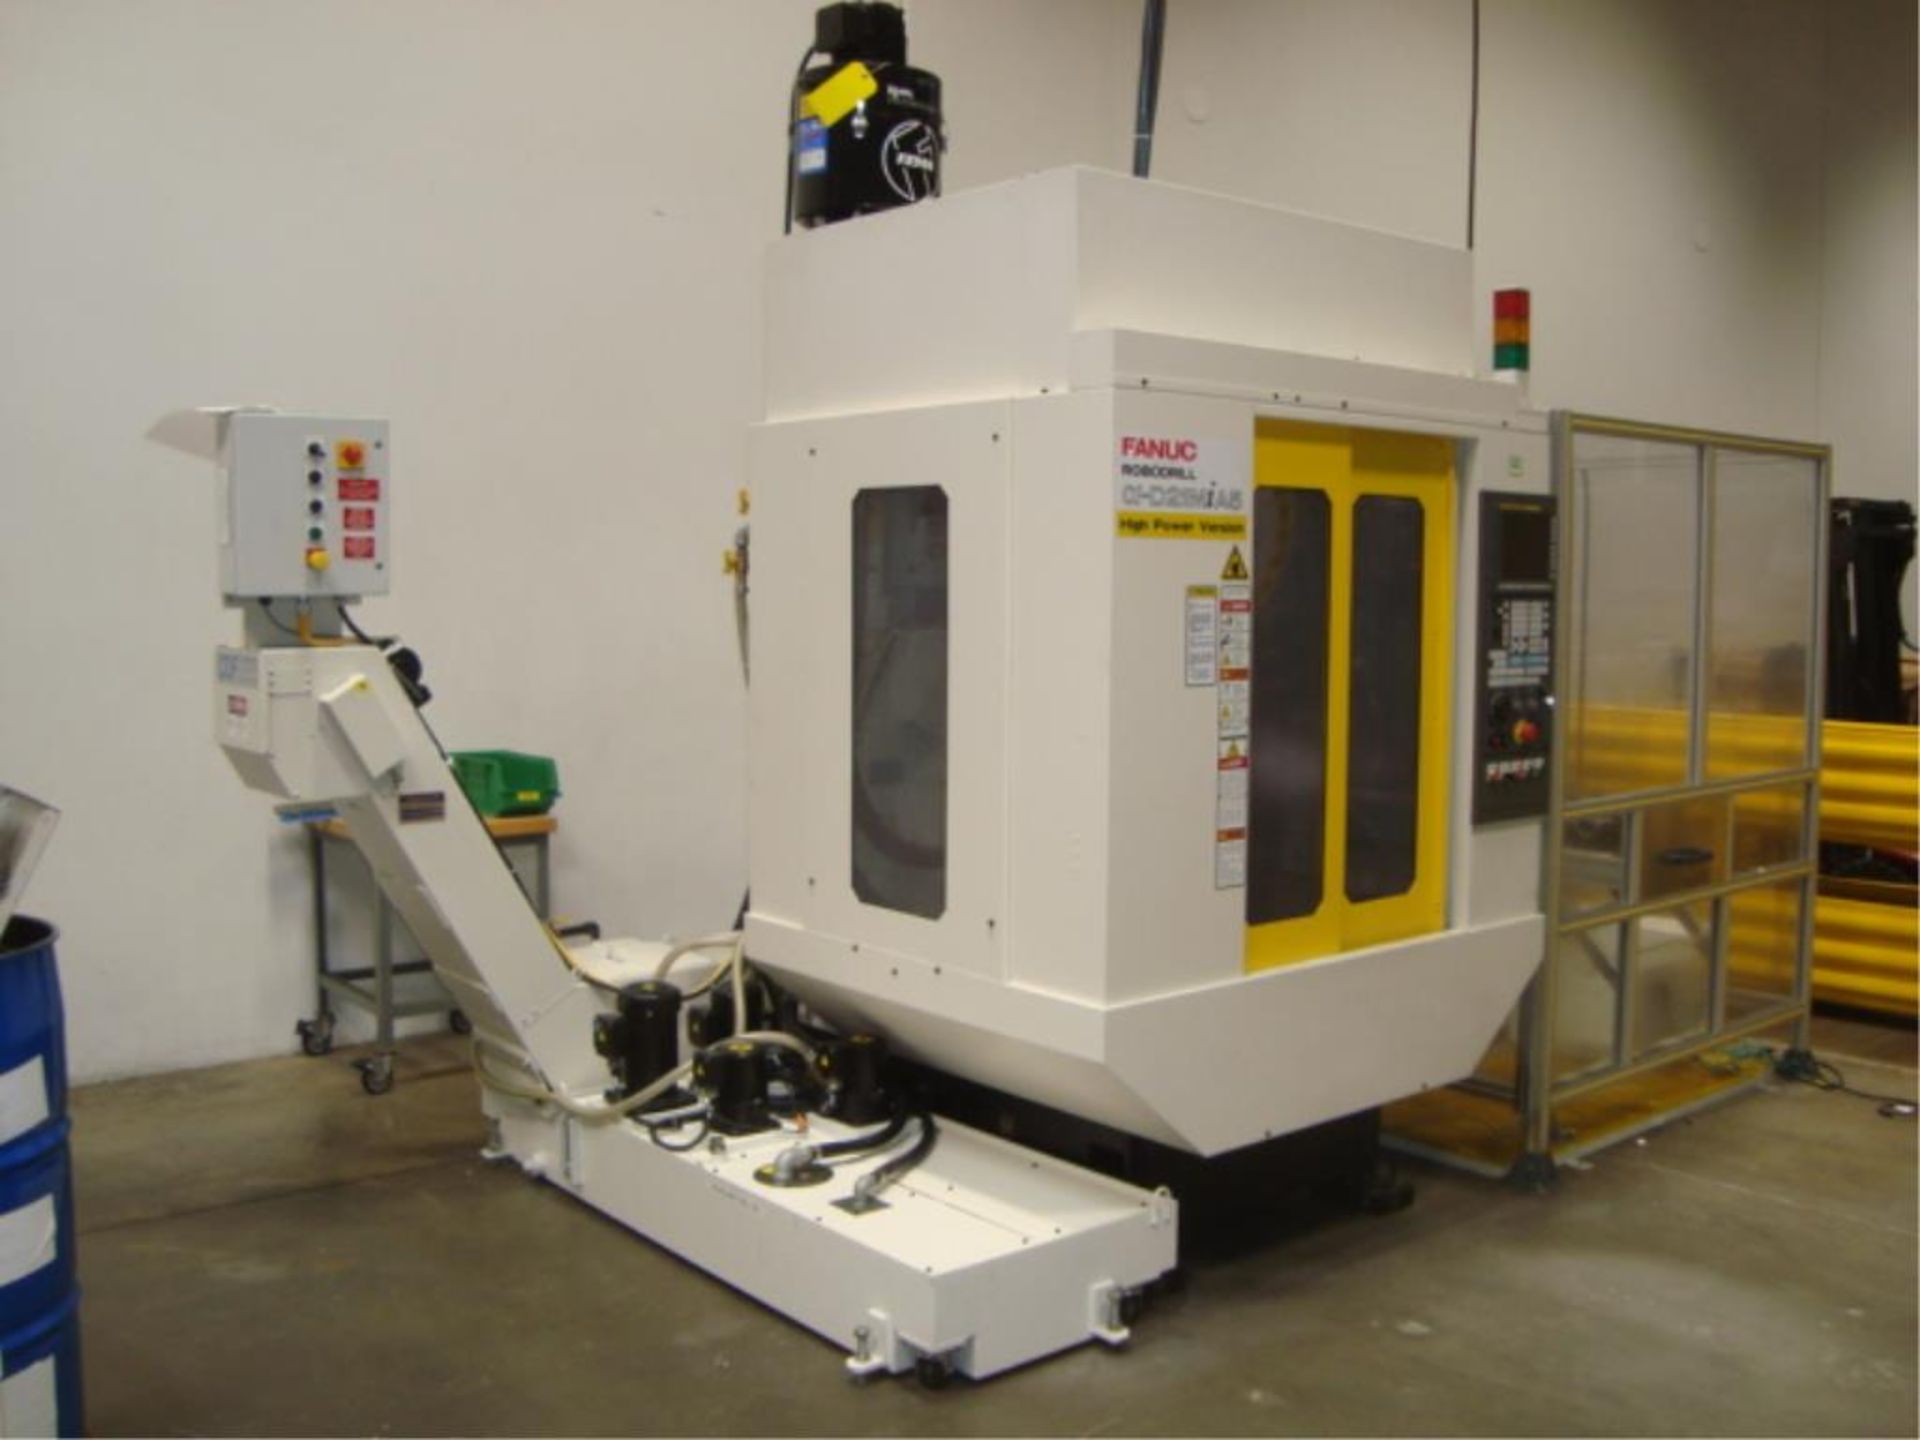 Fanuc Robodrill Alpha-D21MiA5 with Fanuc M-10iA 6-Axis Robot - Image 4 of 60